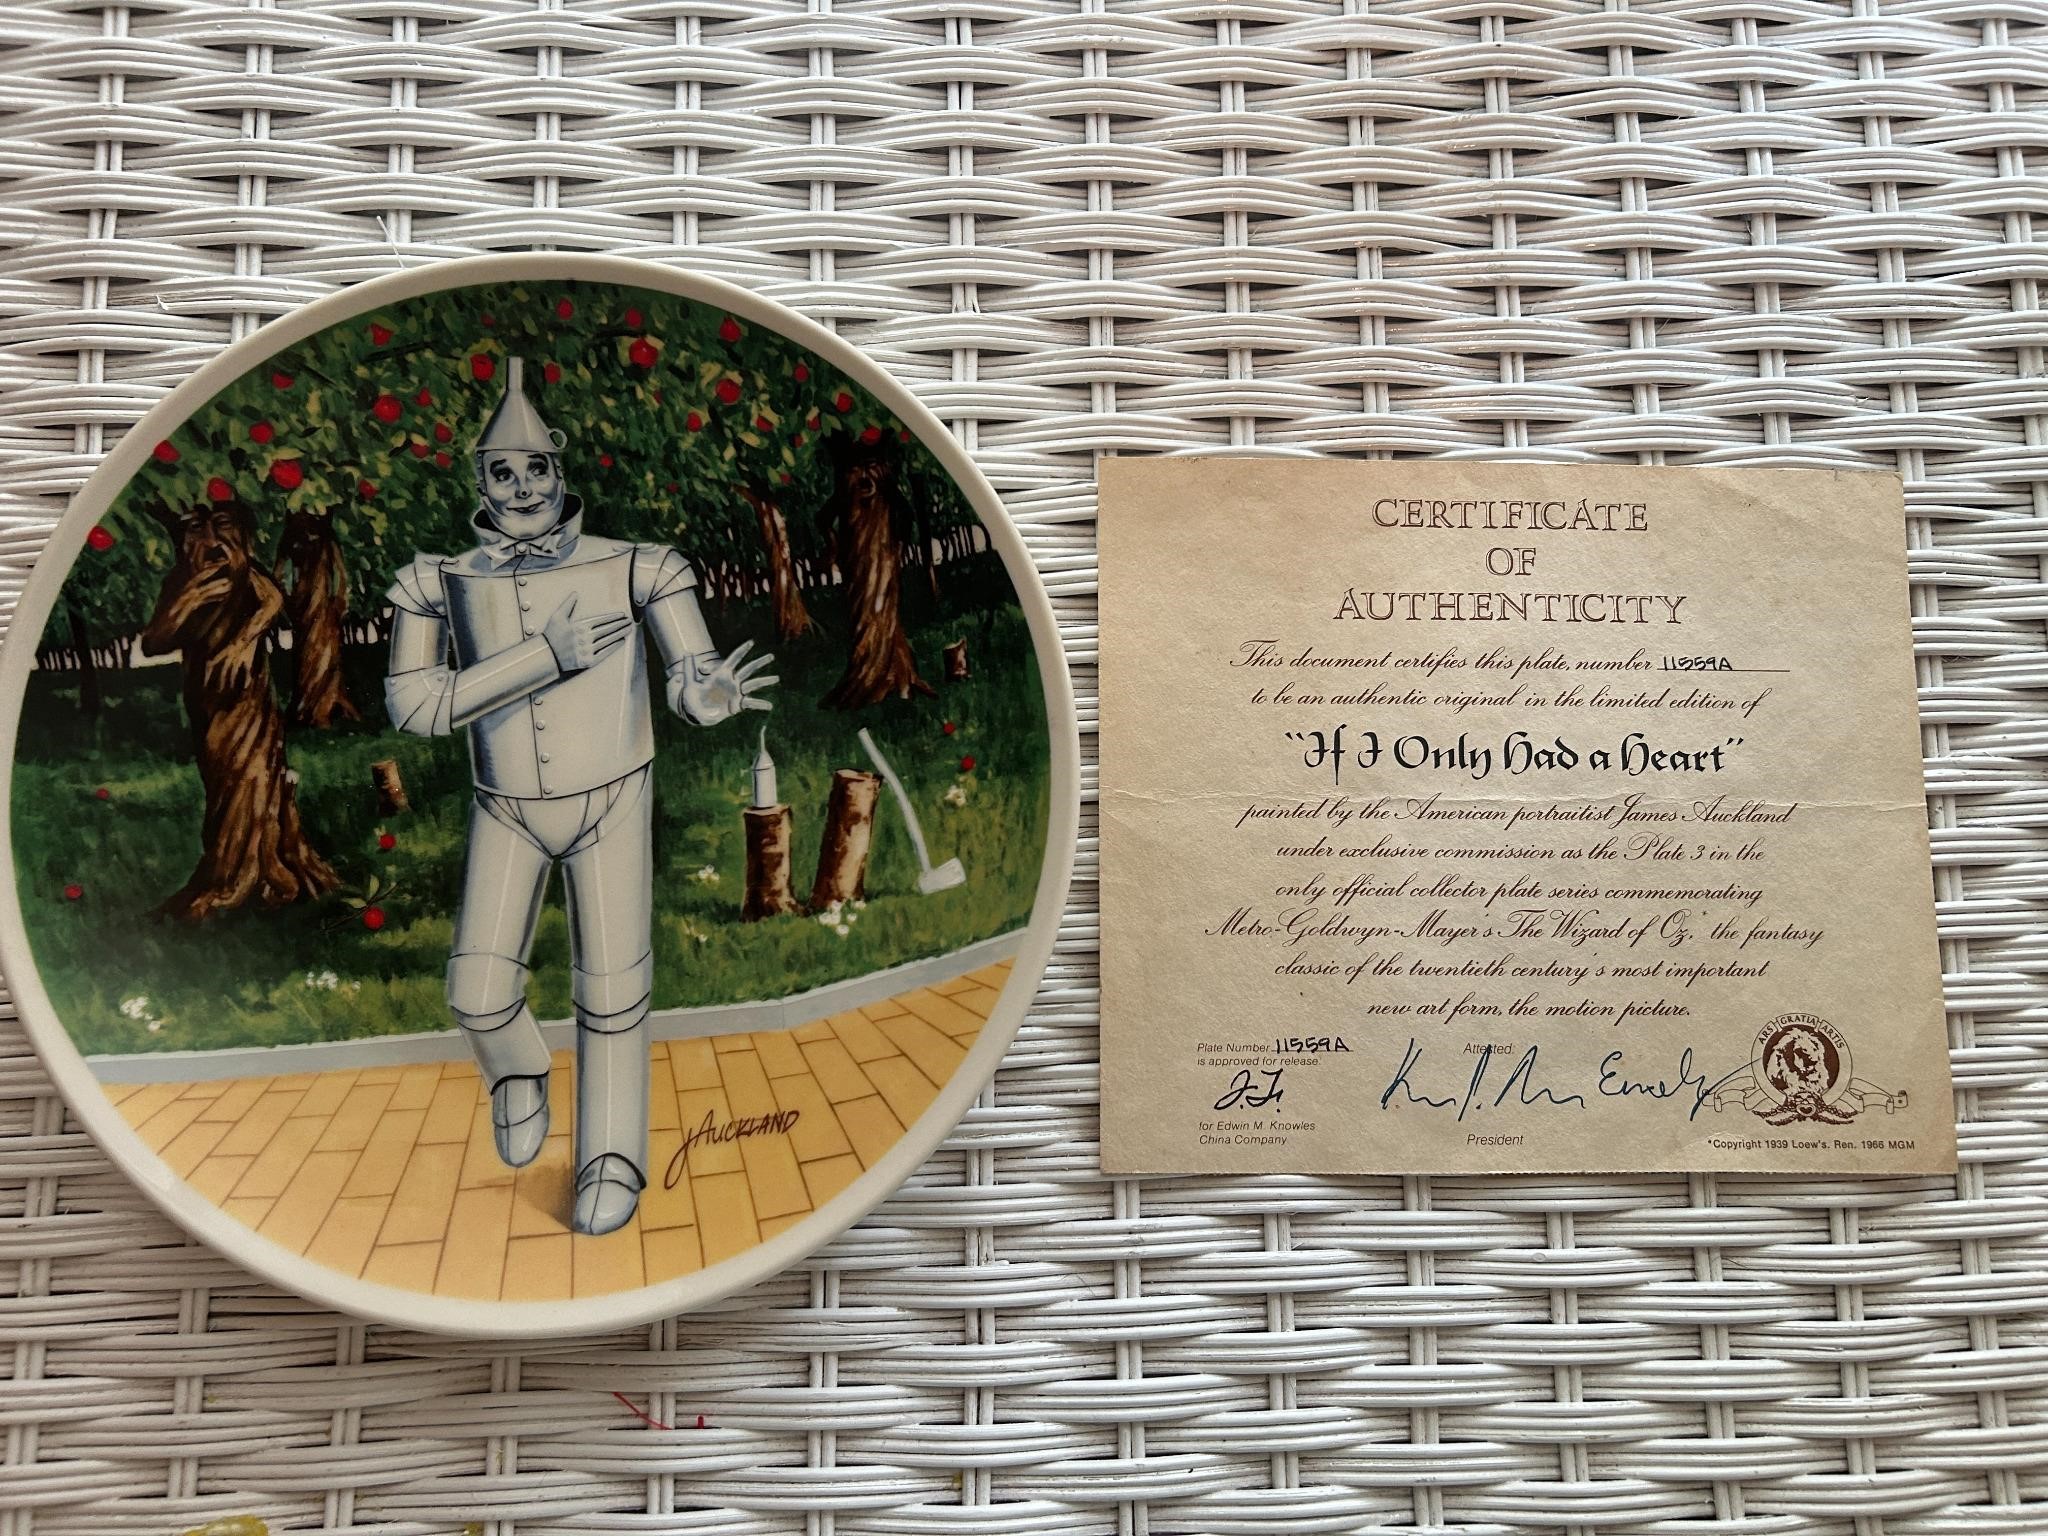 1977 MGM Collectible Plate - Tinman "If Only I had